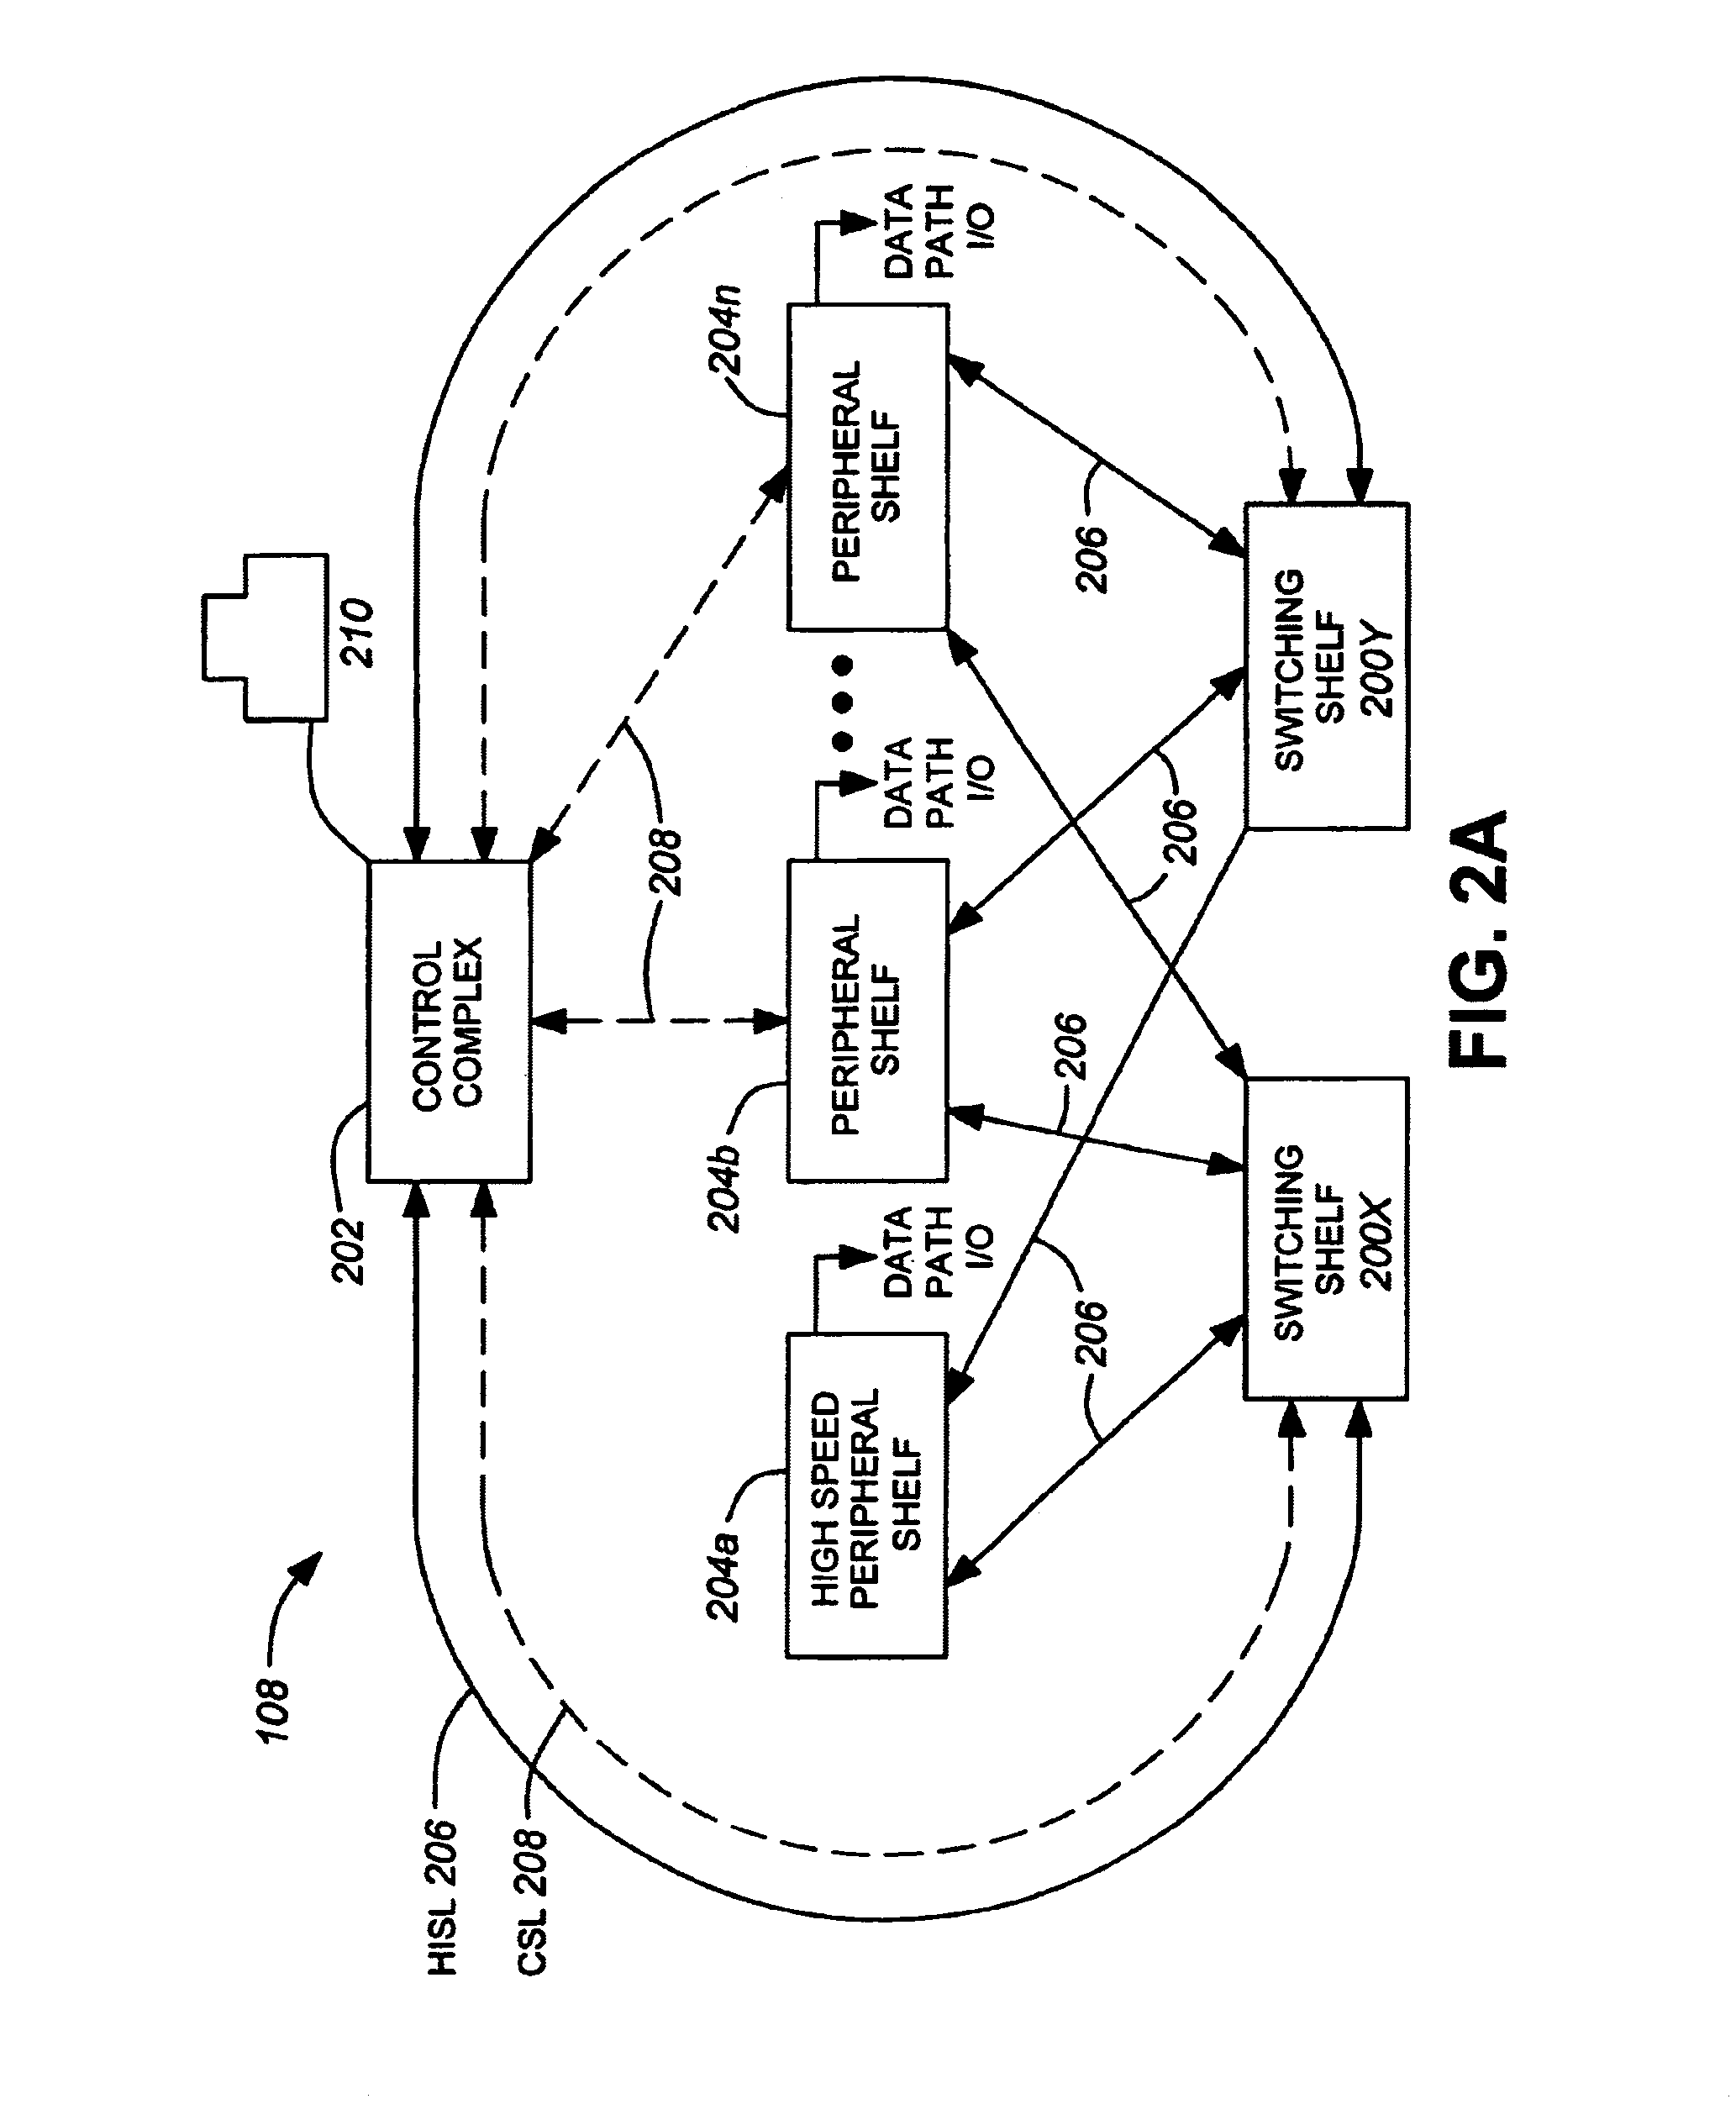 System for providing fabric activity switch control in a communications system